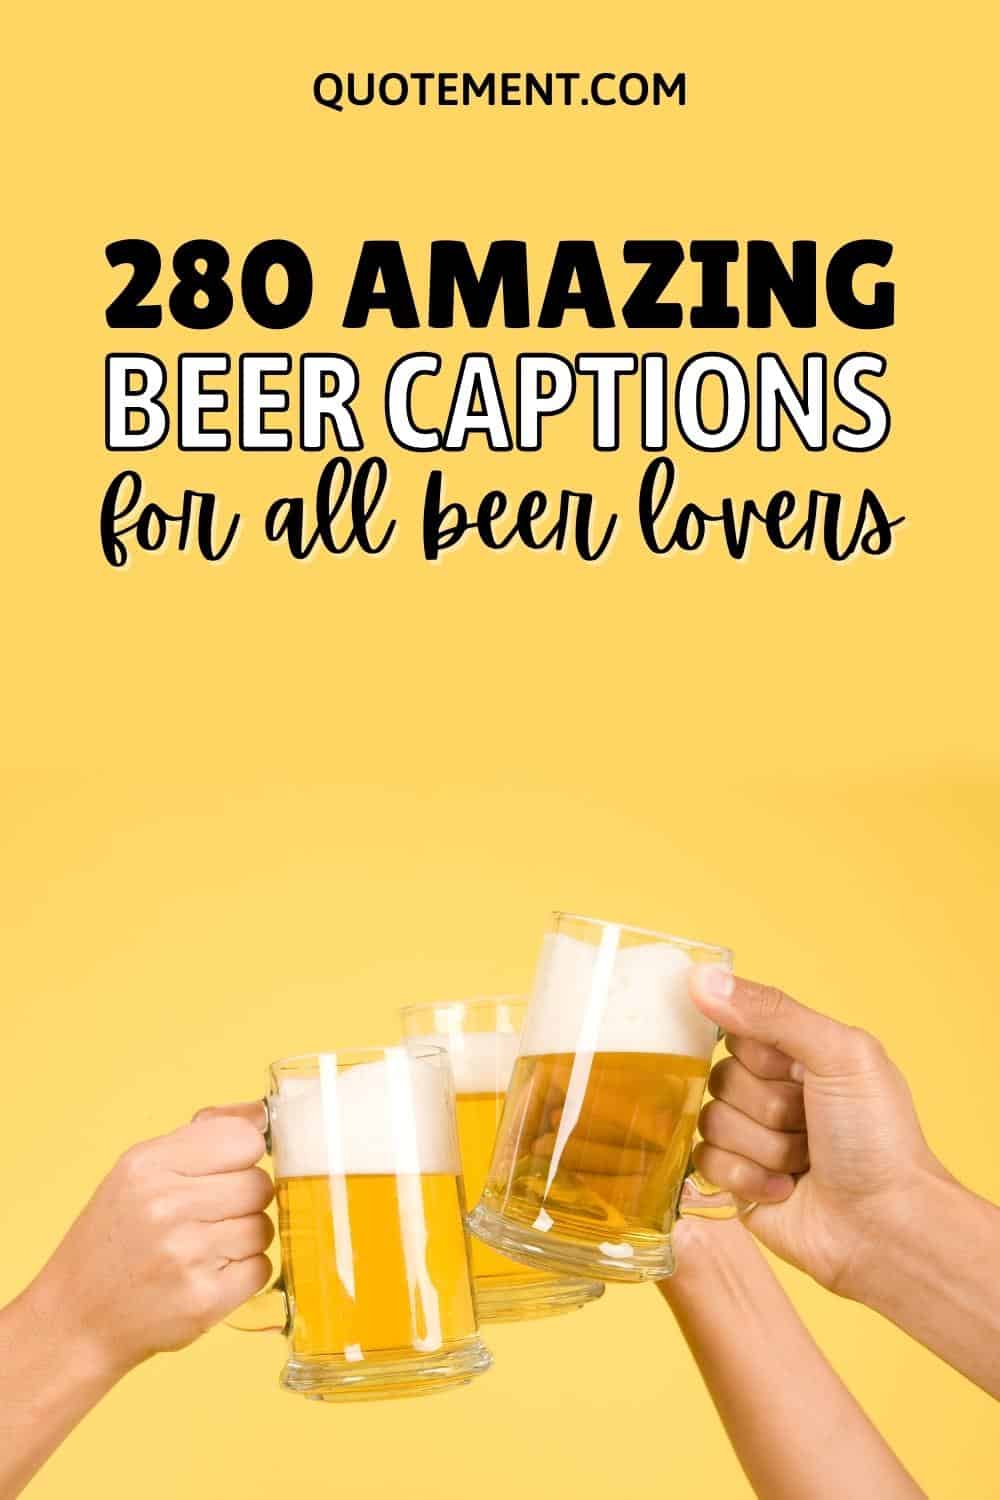 Top 280 Beer Captions For All Brew Lovers & Enthusiasts